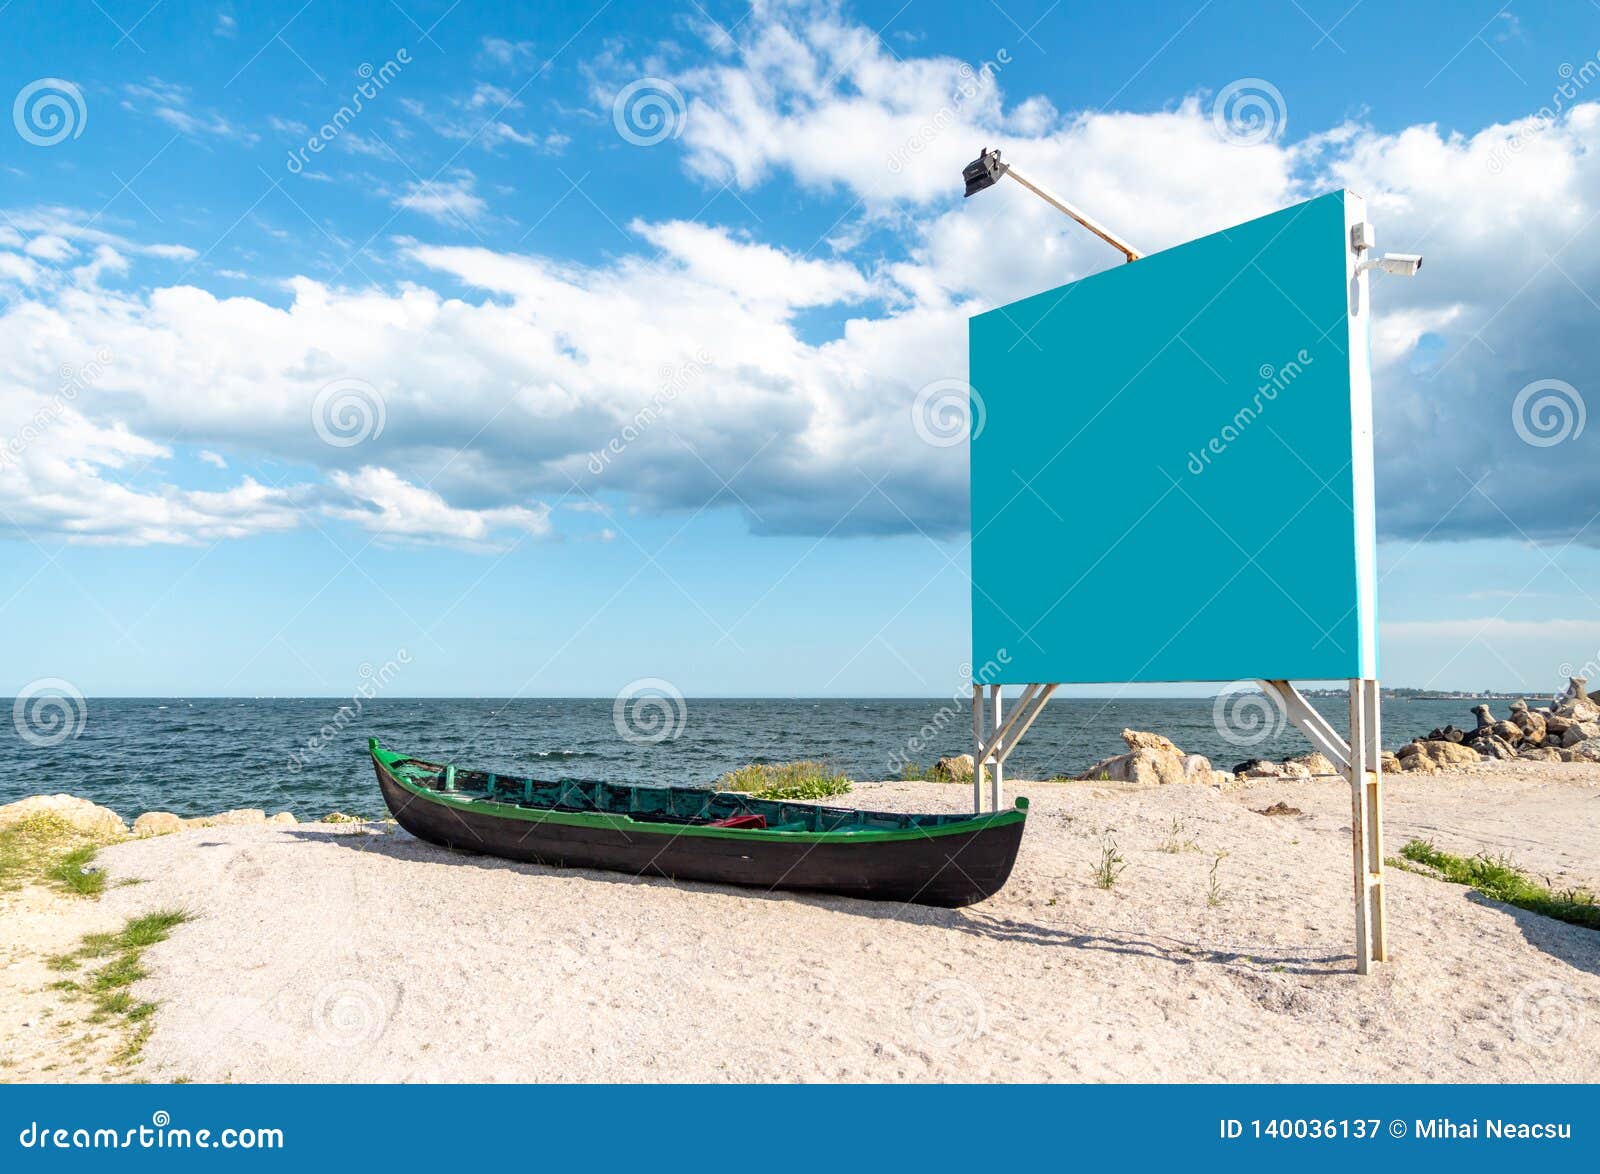 blue empty billboard next to a local, wooden fishing boat, on the sand, at shore of the black sea marea neagra, romanian coast.